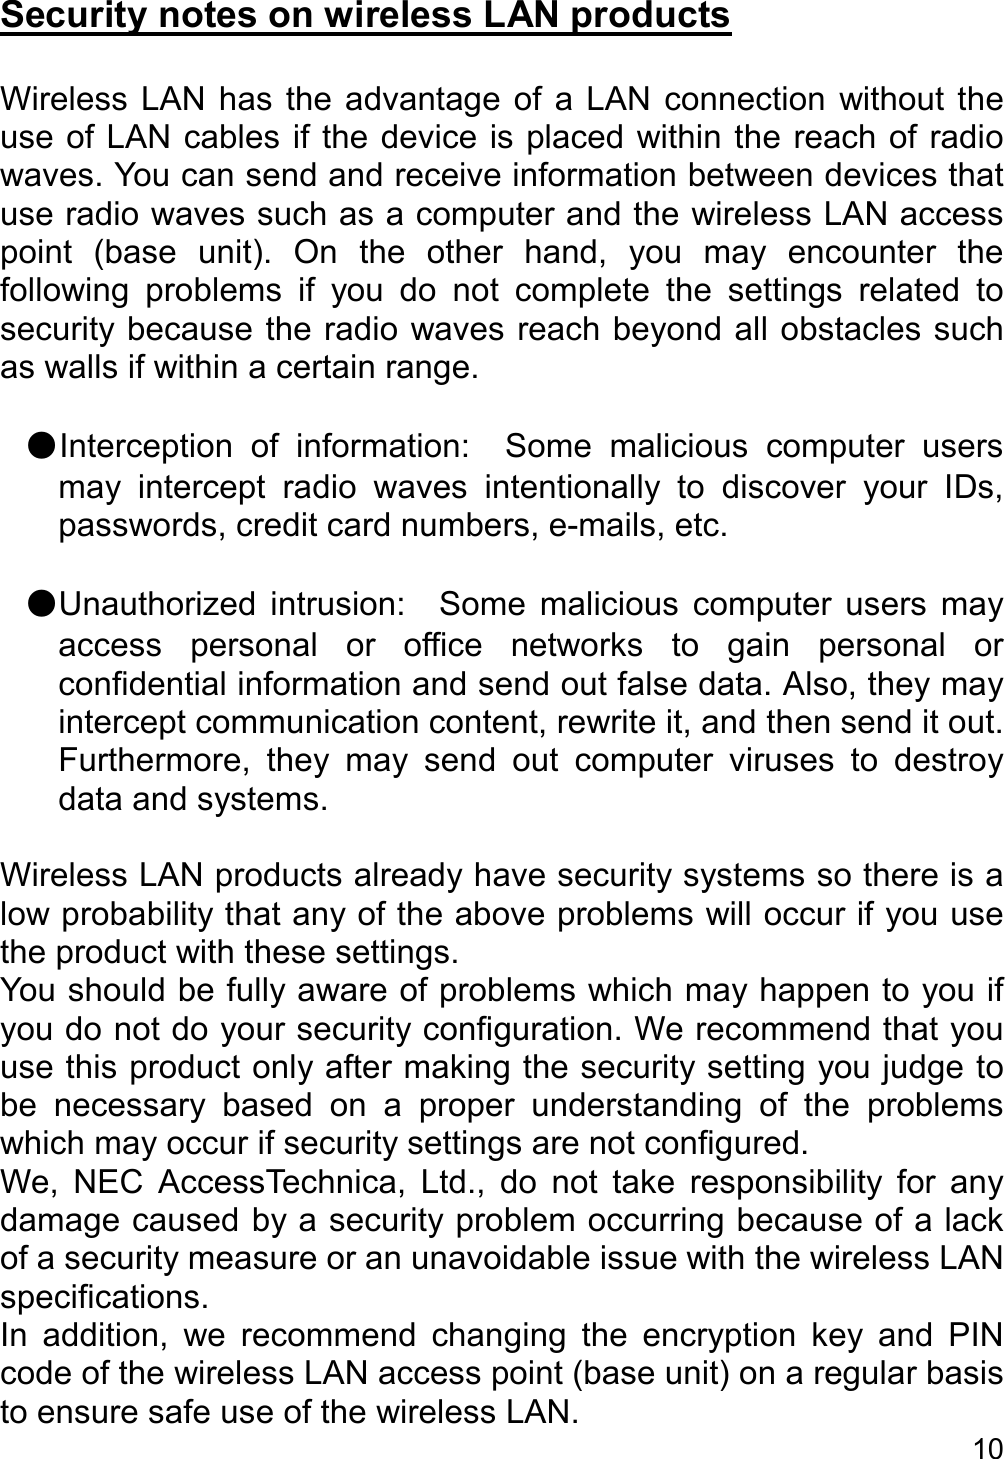   10   Security notes on wireless LAN products  Wireless  LAN  has  the  advantage  of  a  LAN connection  without  the use of LAN cables if the device is placed within the reach of radio waves. You can send and receive information between devices that use radio waves such as a computer and the wireless LAN access point  (base  unit).  On  the  other  hand,  you  may  encounter  the following  problems  if  you  do  not  complete  the  settings  related  to security because the radio waves reach beyond all obstacles such as walls if within a certain range.  ●Interception  of  information:    Some  malicious  computer  users may  intercept  radio  waves  intentionally  to  discover  your  IDs, passwords, credit card numbers, e-mails, etc.  ●Unauthorized  intrusion:    Some  malicious  computer  users  may access  personal  or  office  networks  to  gain  personal  or confidential information and send out false data. Also, they may intercept communication content, rewrite it, and then send it out. Furthermore,  they  may  send  out  computer  viruses  to  destroy data and systems.  Wireless LAN products already have security systems so there is a low probability that any of the above problems will occur if you use the product with these settings. You should be fully aware of problems which may happen to you if you do not do your security configuration. We recommend that you use this product only after making the security setting you judge to be  necessary  based  on  a  proper  understanding  of  the  problems which may occur if security settings are not configured. We,  NEC  AccessTechnica,  Ltd.,  do  not  take  responsibility  for  any damage caused by a security problem occurring because of a lack of a security measure or an unavoidable issue with the wireless LAN specifications. In  addition,  we  recommend  changing  the  encryption  key  and  PIN code of the wireless LAN access point (base unit) on a regular basis to ensure safe use of the wireless LAN.   